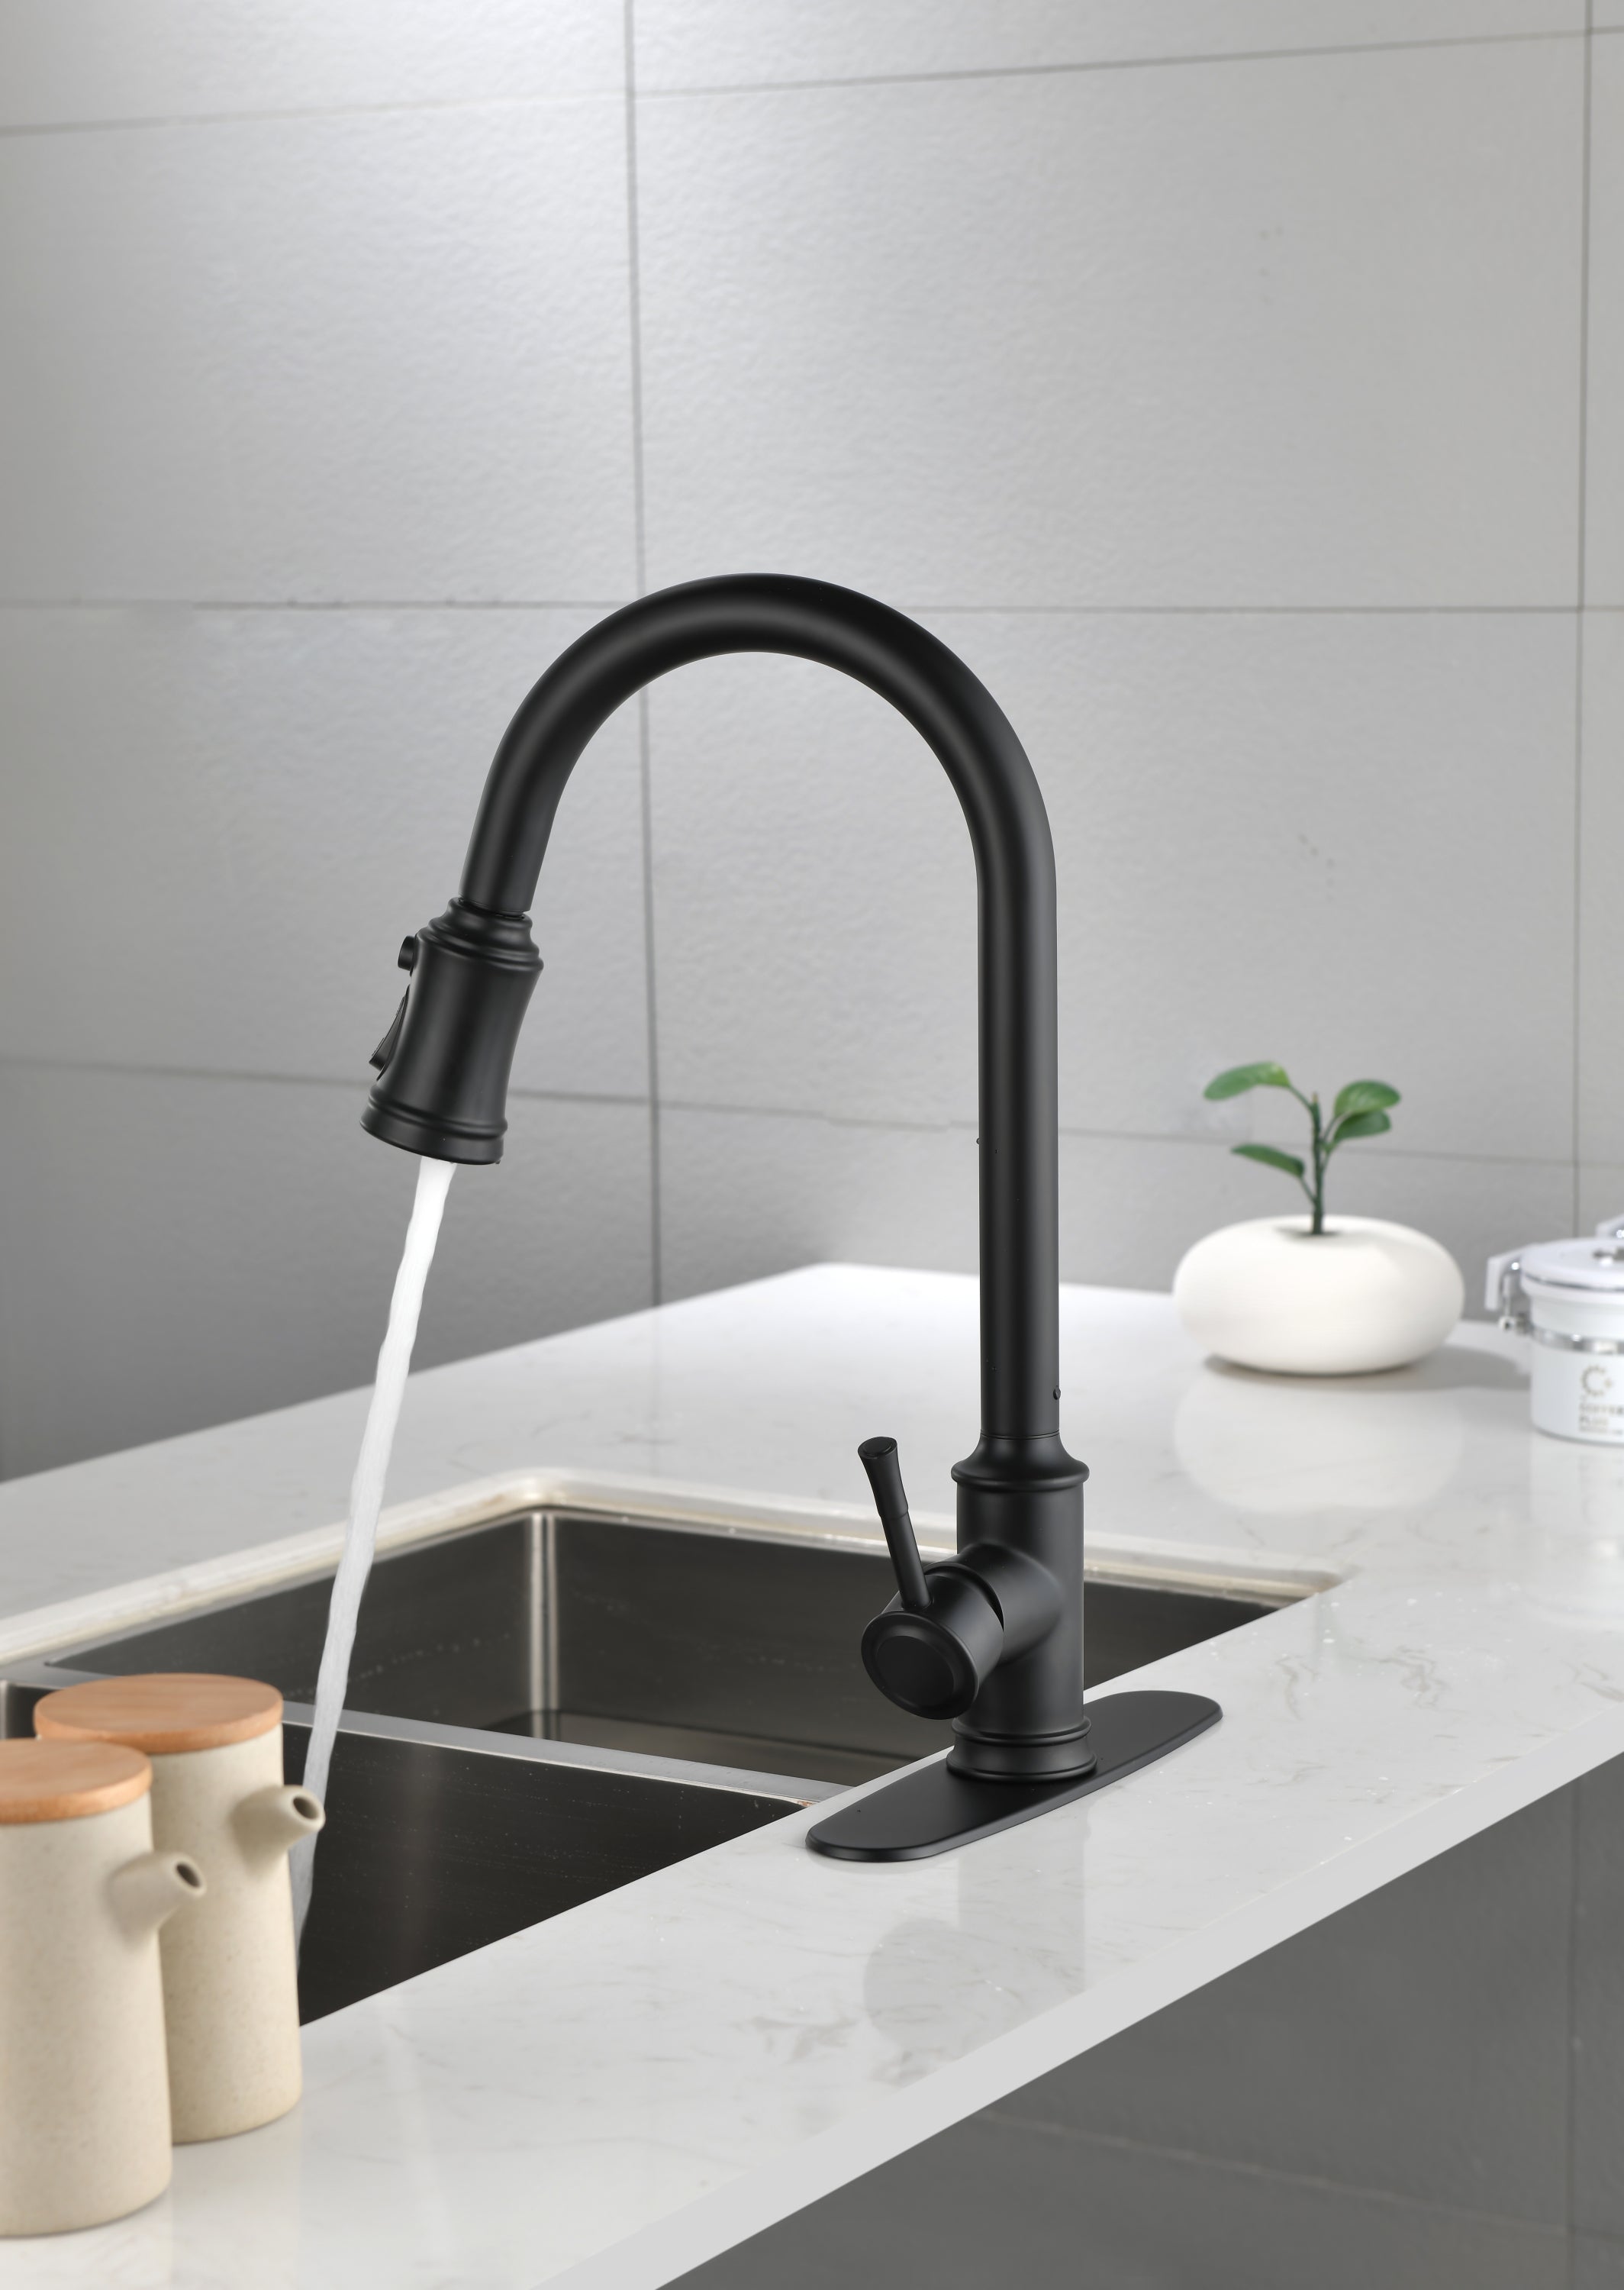 Single Level Stainless Steel Kitchen Sink Faucets with Pull Down Sprayer - Matt Black